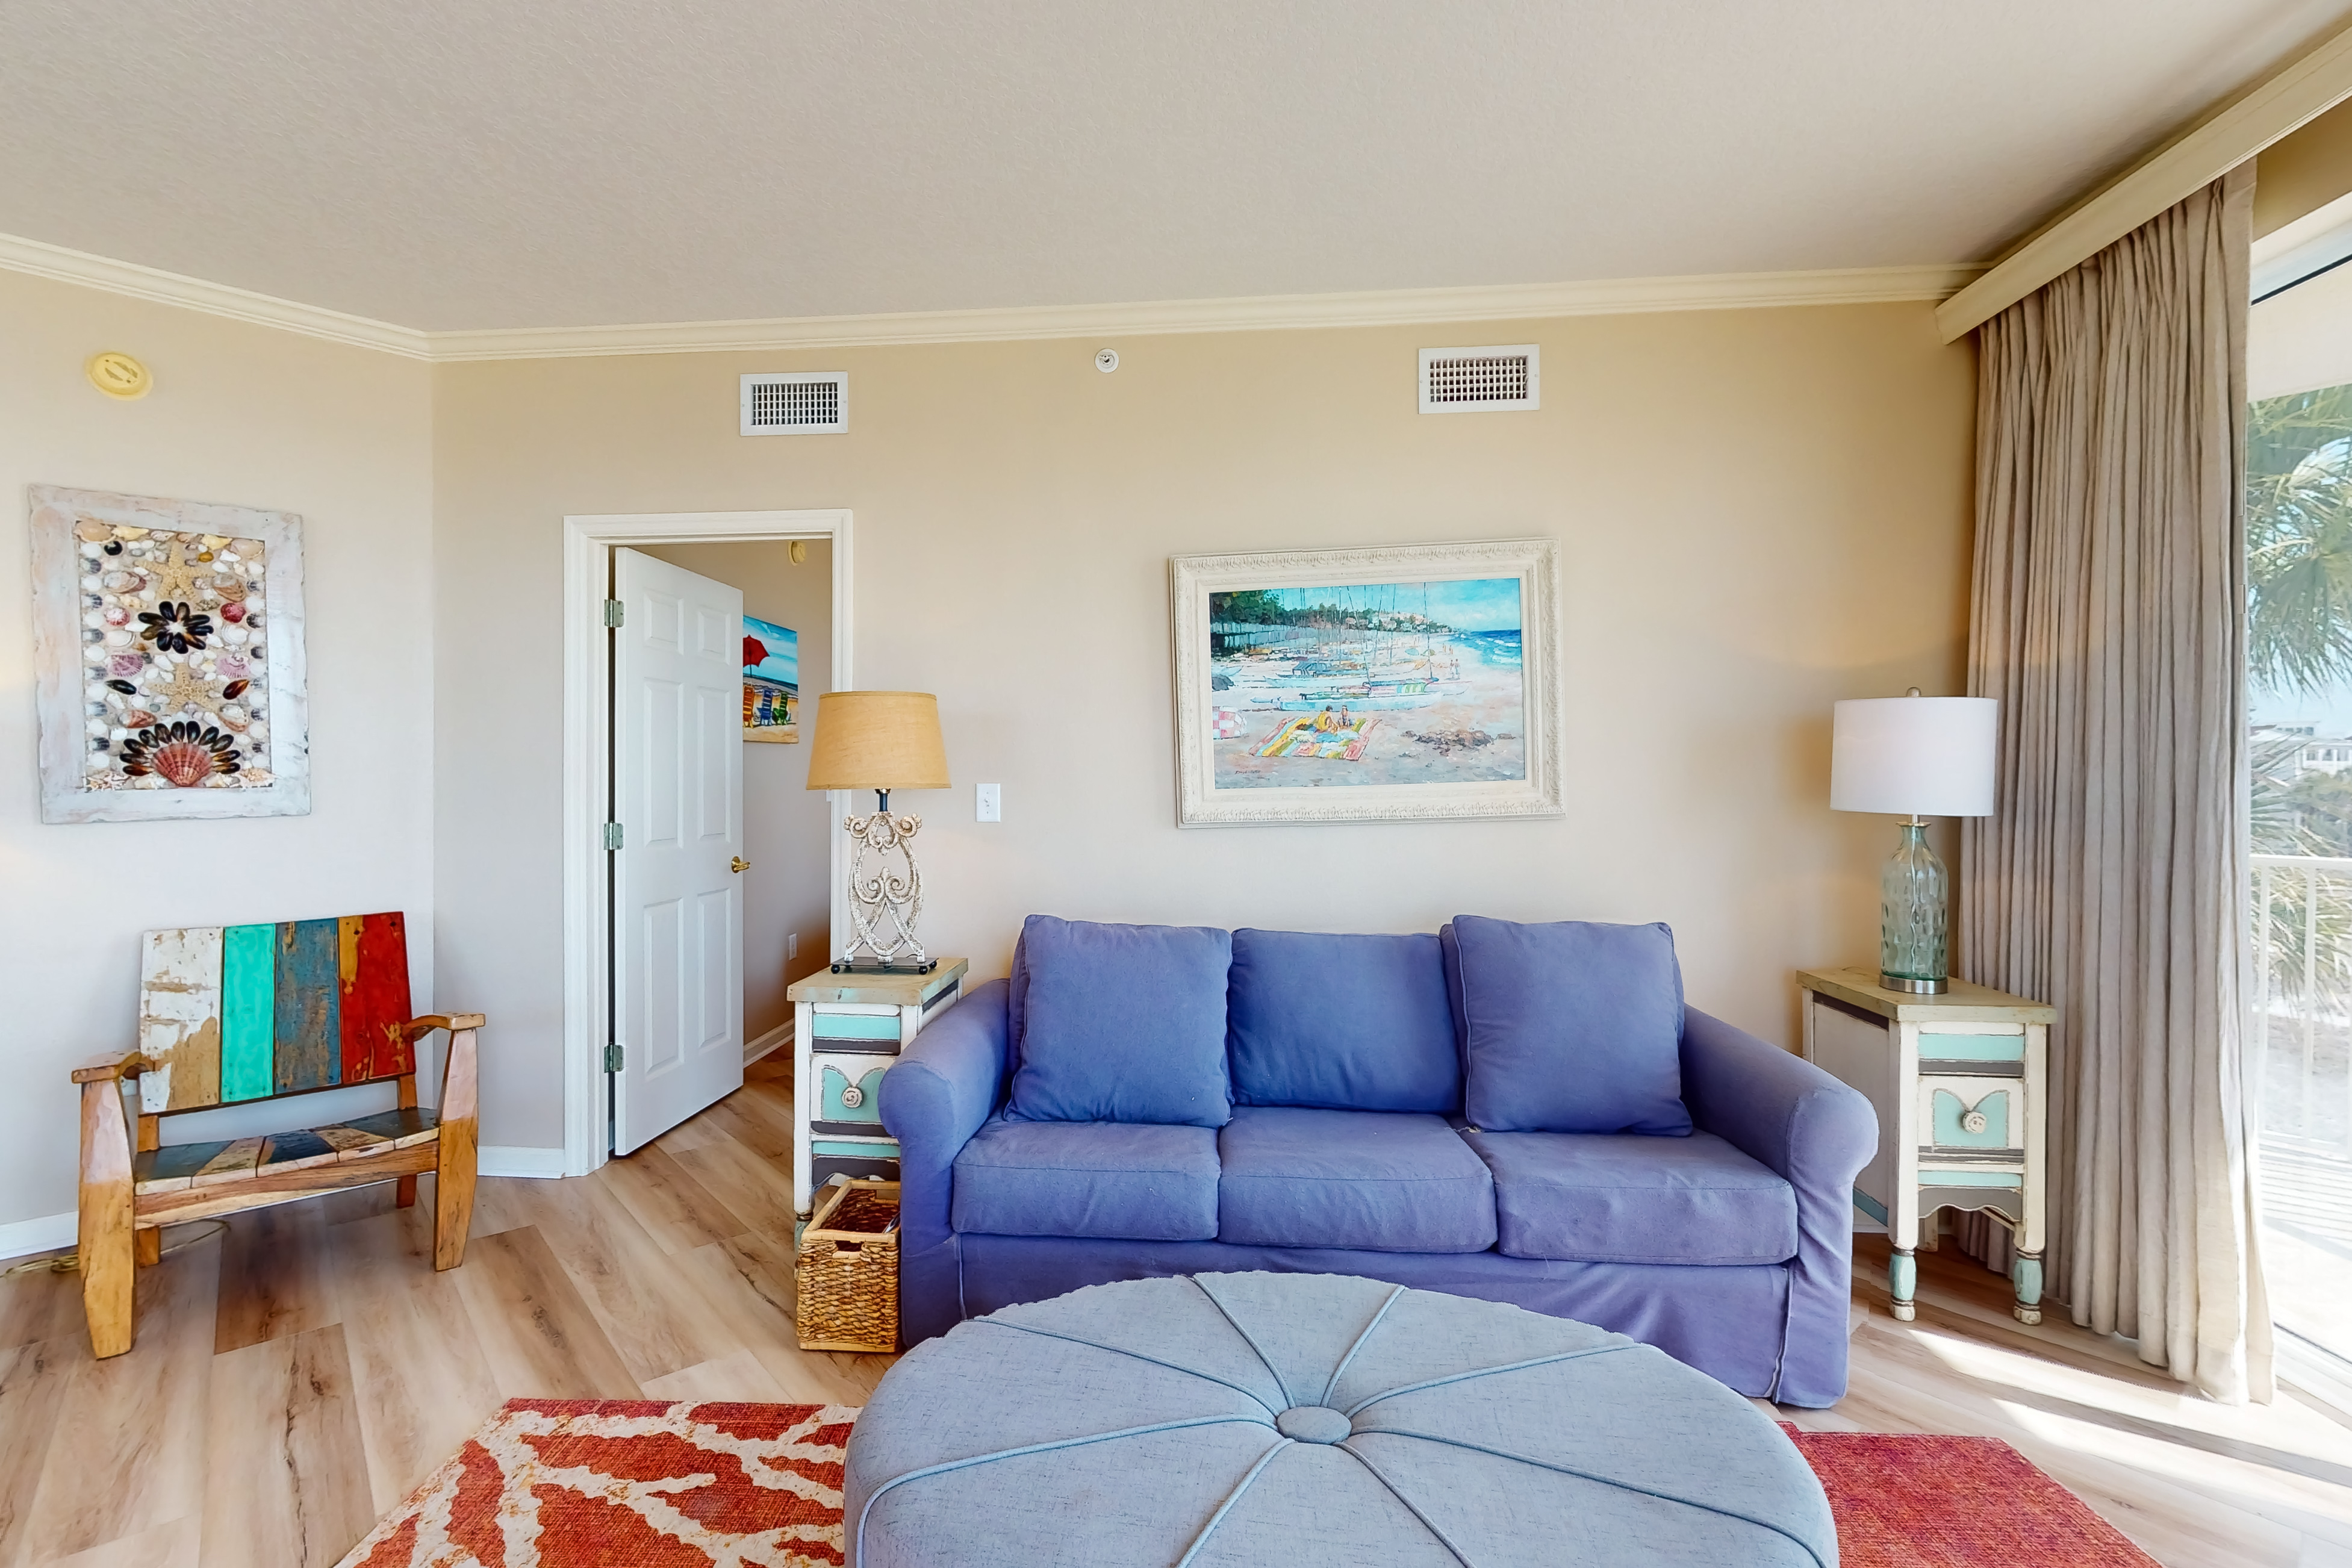 Dunes of Seagrove A209 Condo rental in Dunes of Seagrove in Highway 30-A Florida - #2